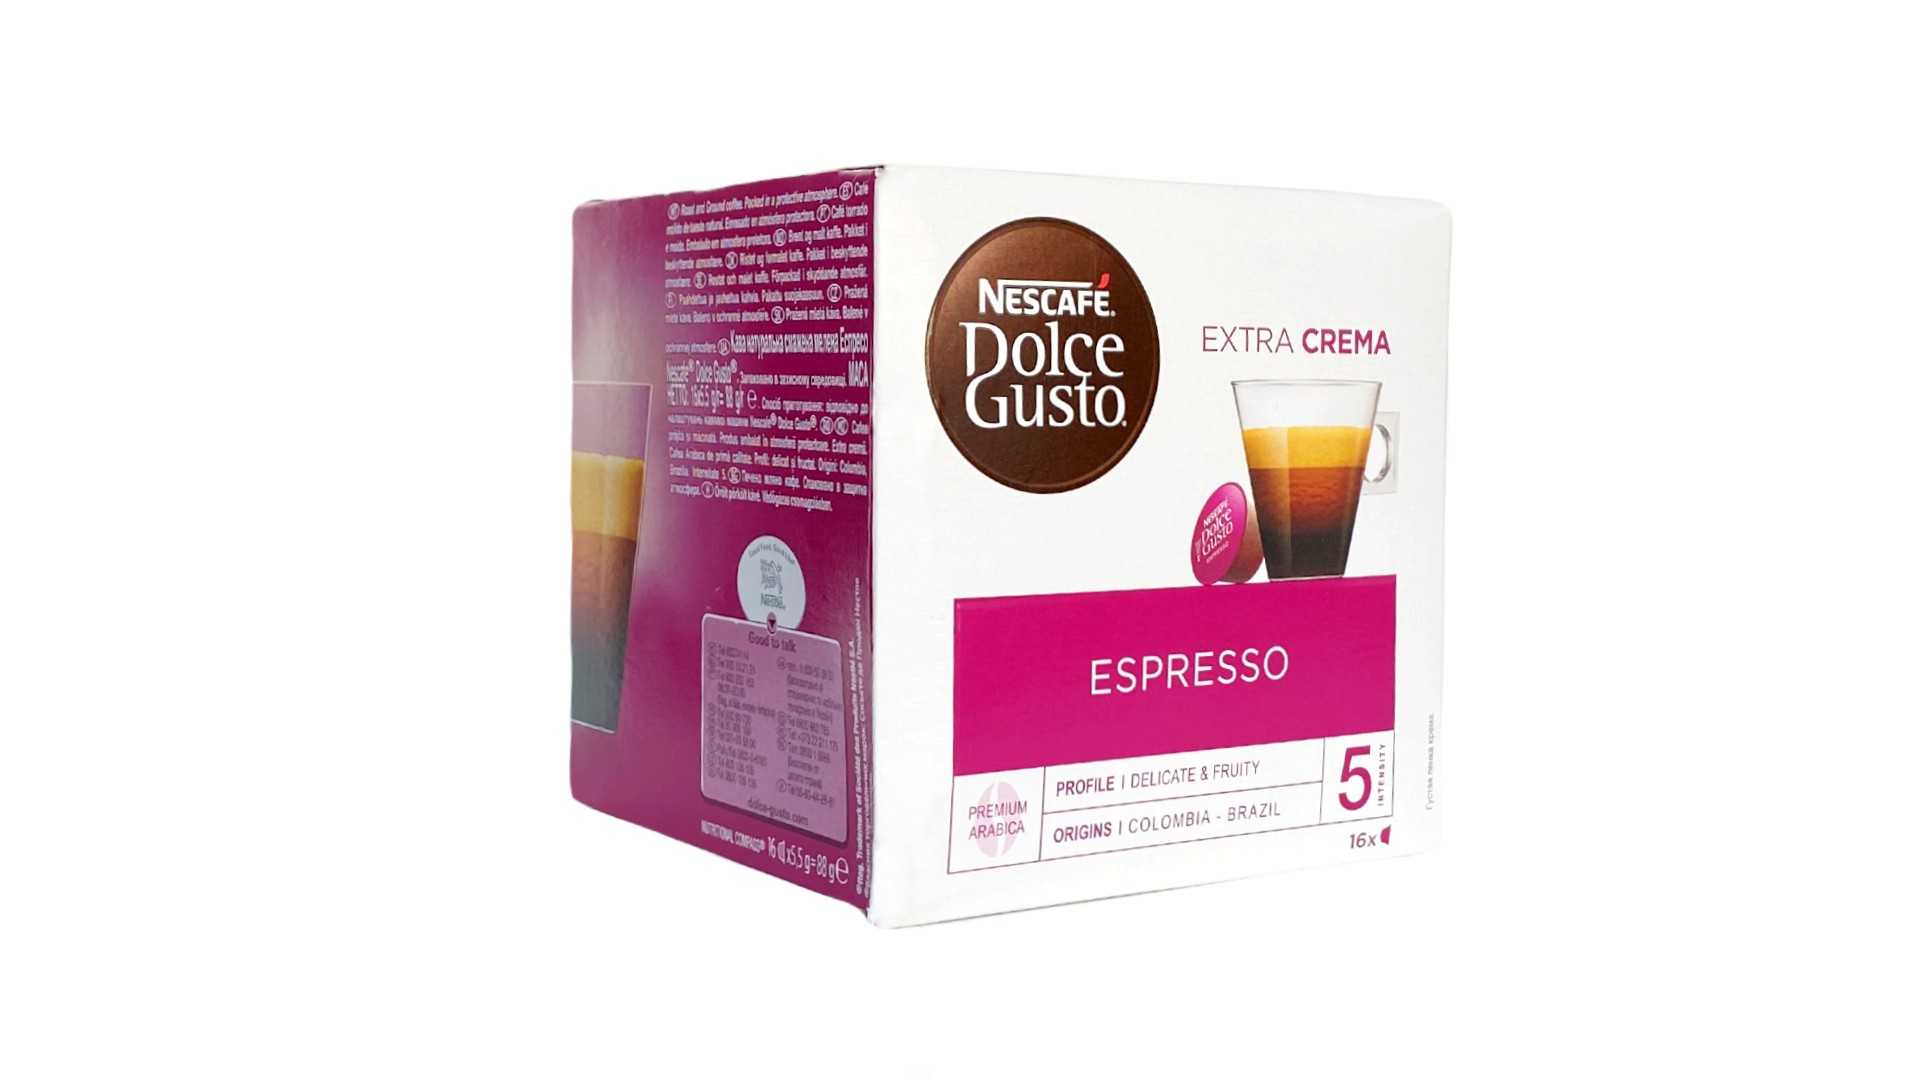 Espresso intenso капсулы Dolce gusto. "Cellini" капсулы для Dolce gusto Espresso deciso. Lebo Expresso dolche gusto. Дольче густо kr 230.